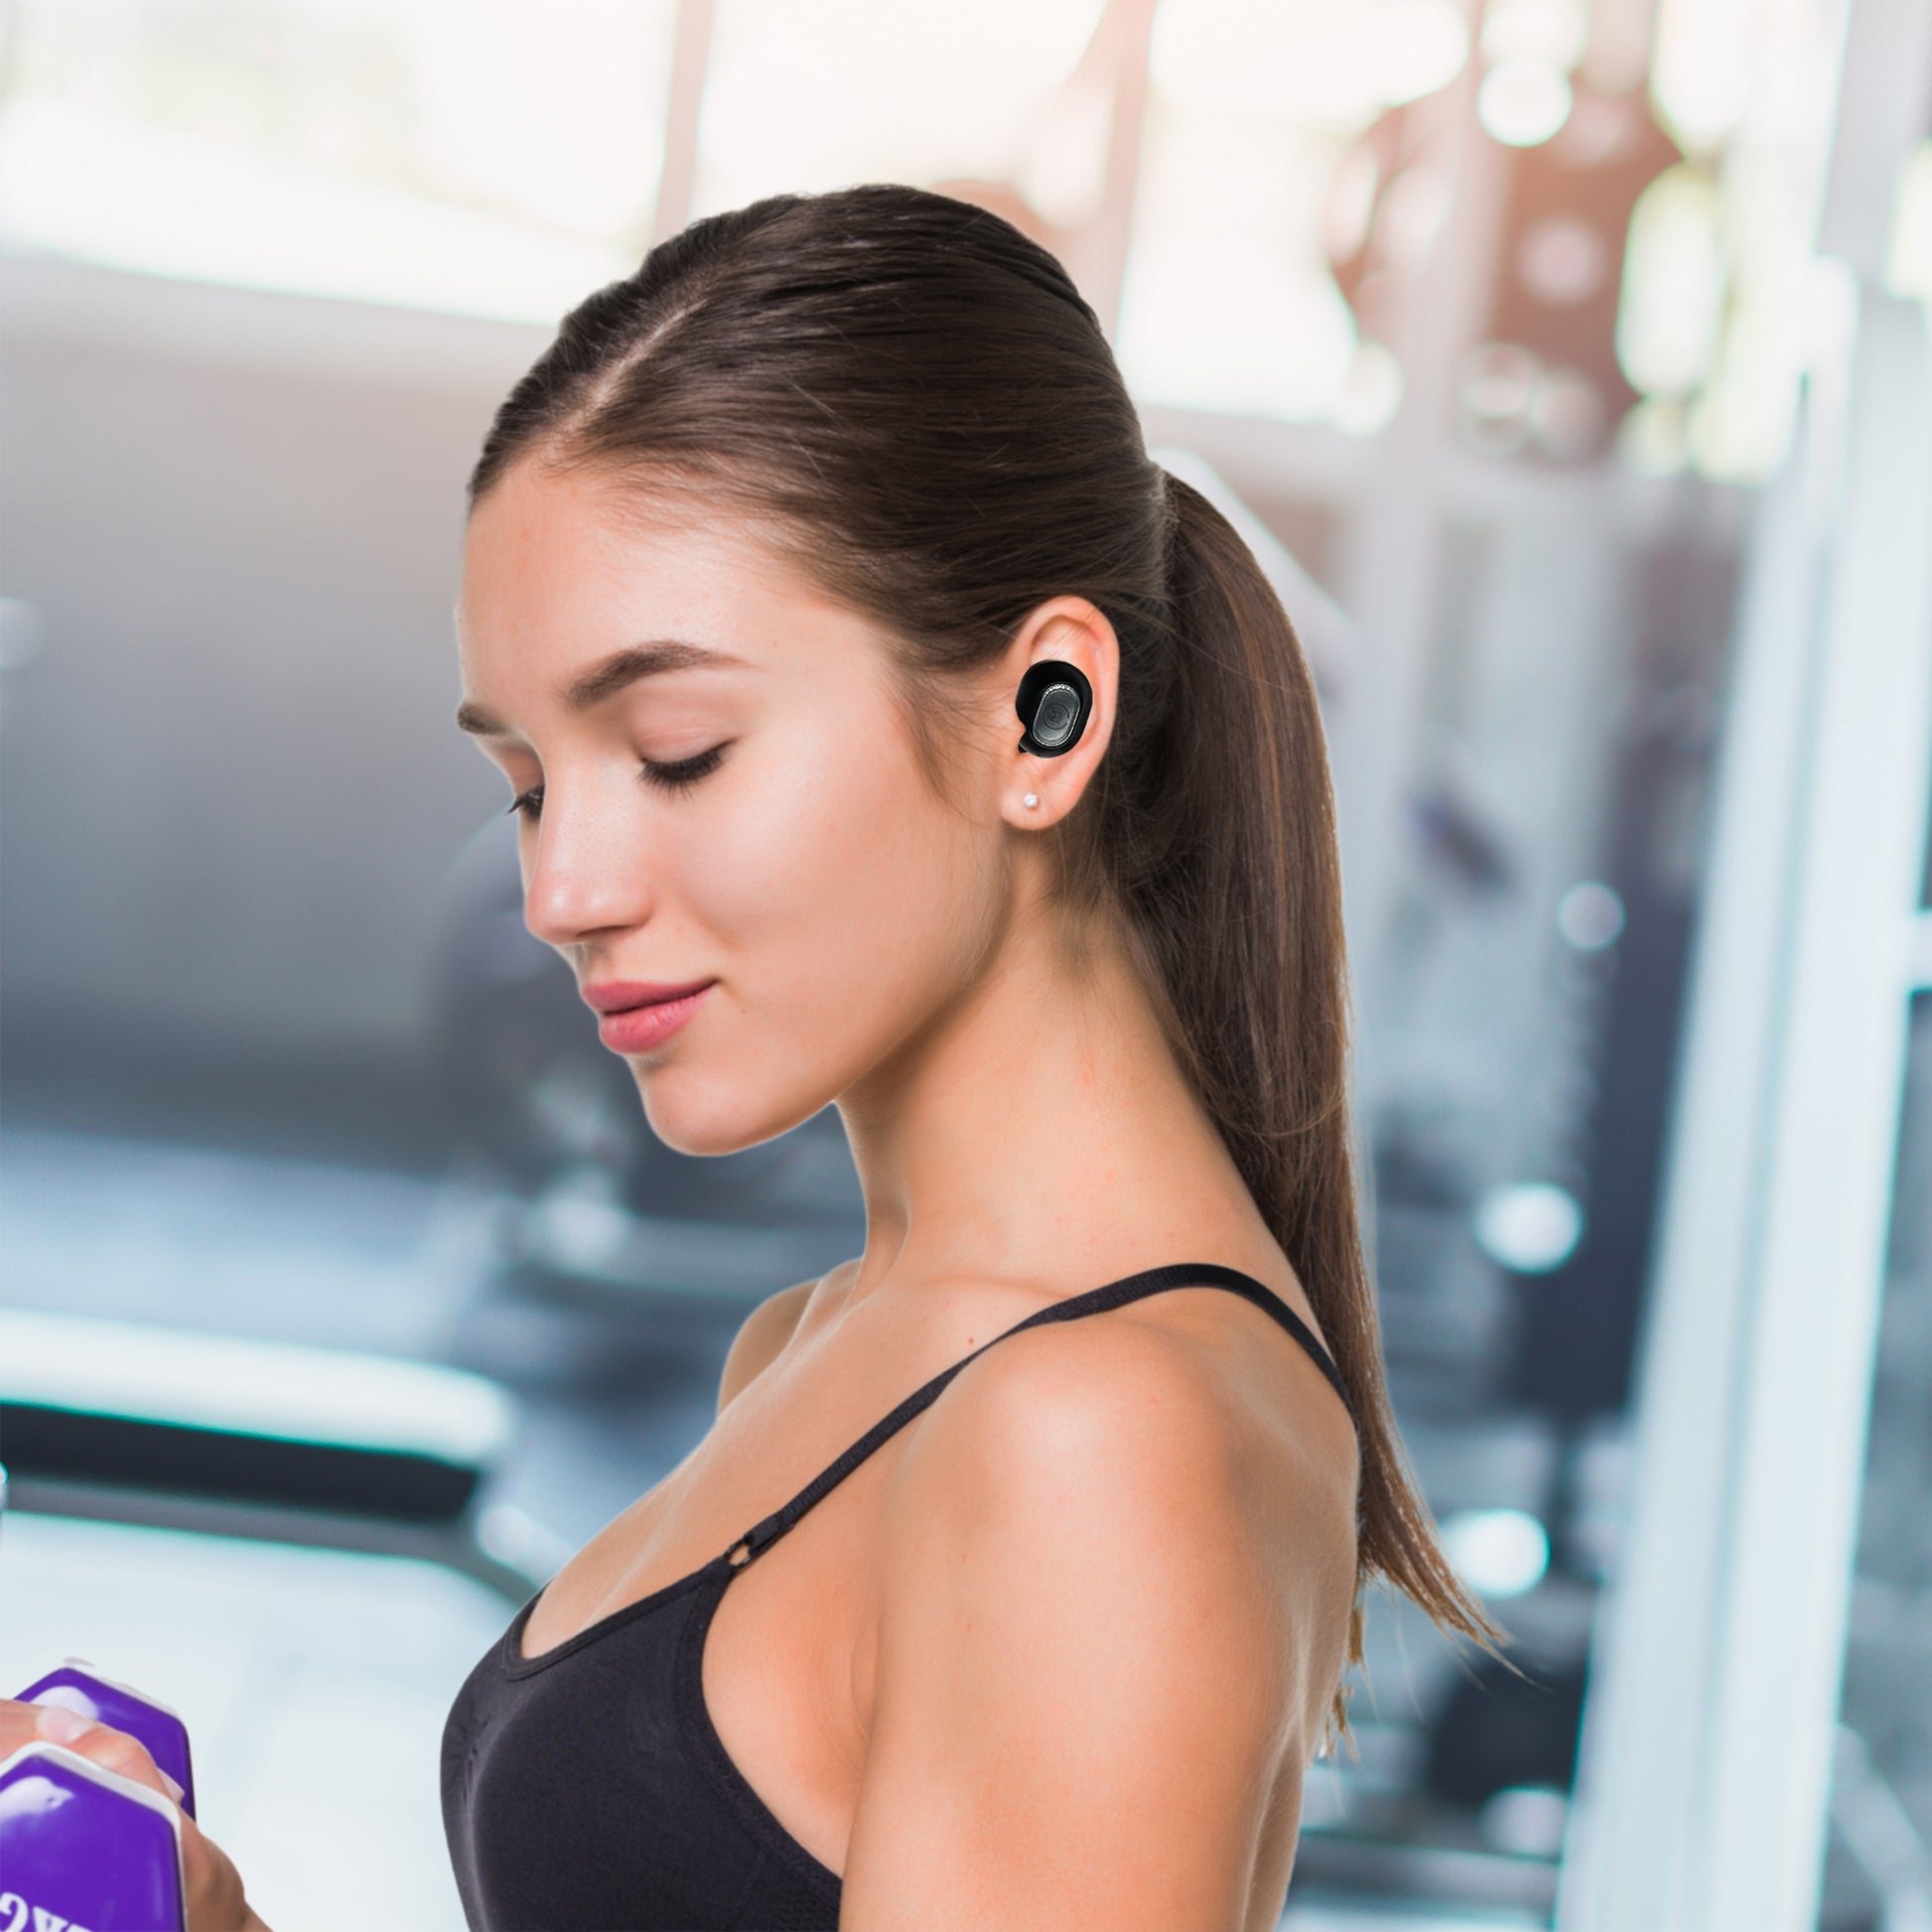 Photo of Morpheus 360 Pulse 360 True Wireless Earbuds shows a young asian female using the Pulse 360 earbuds while working out.